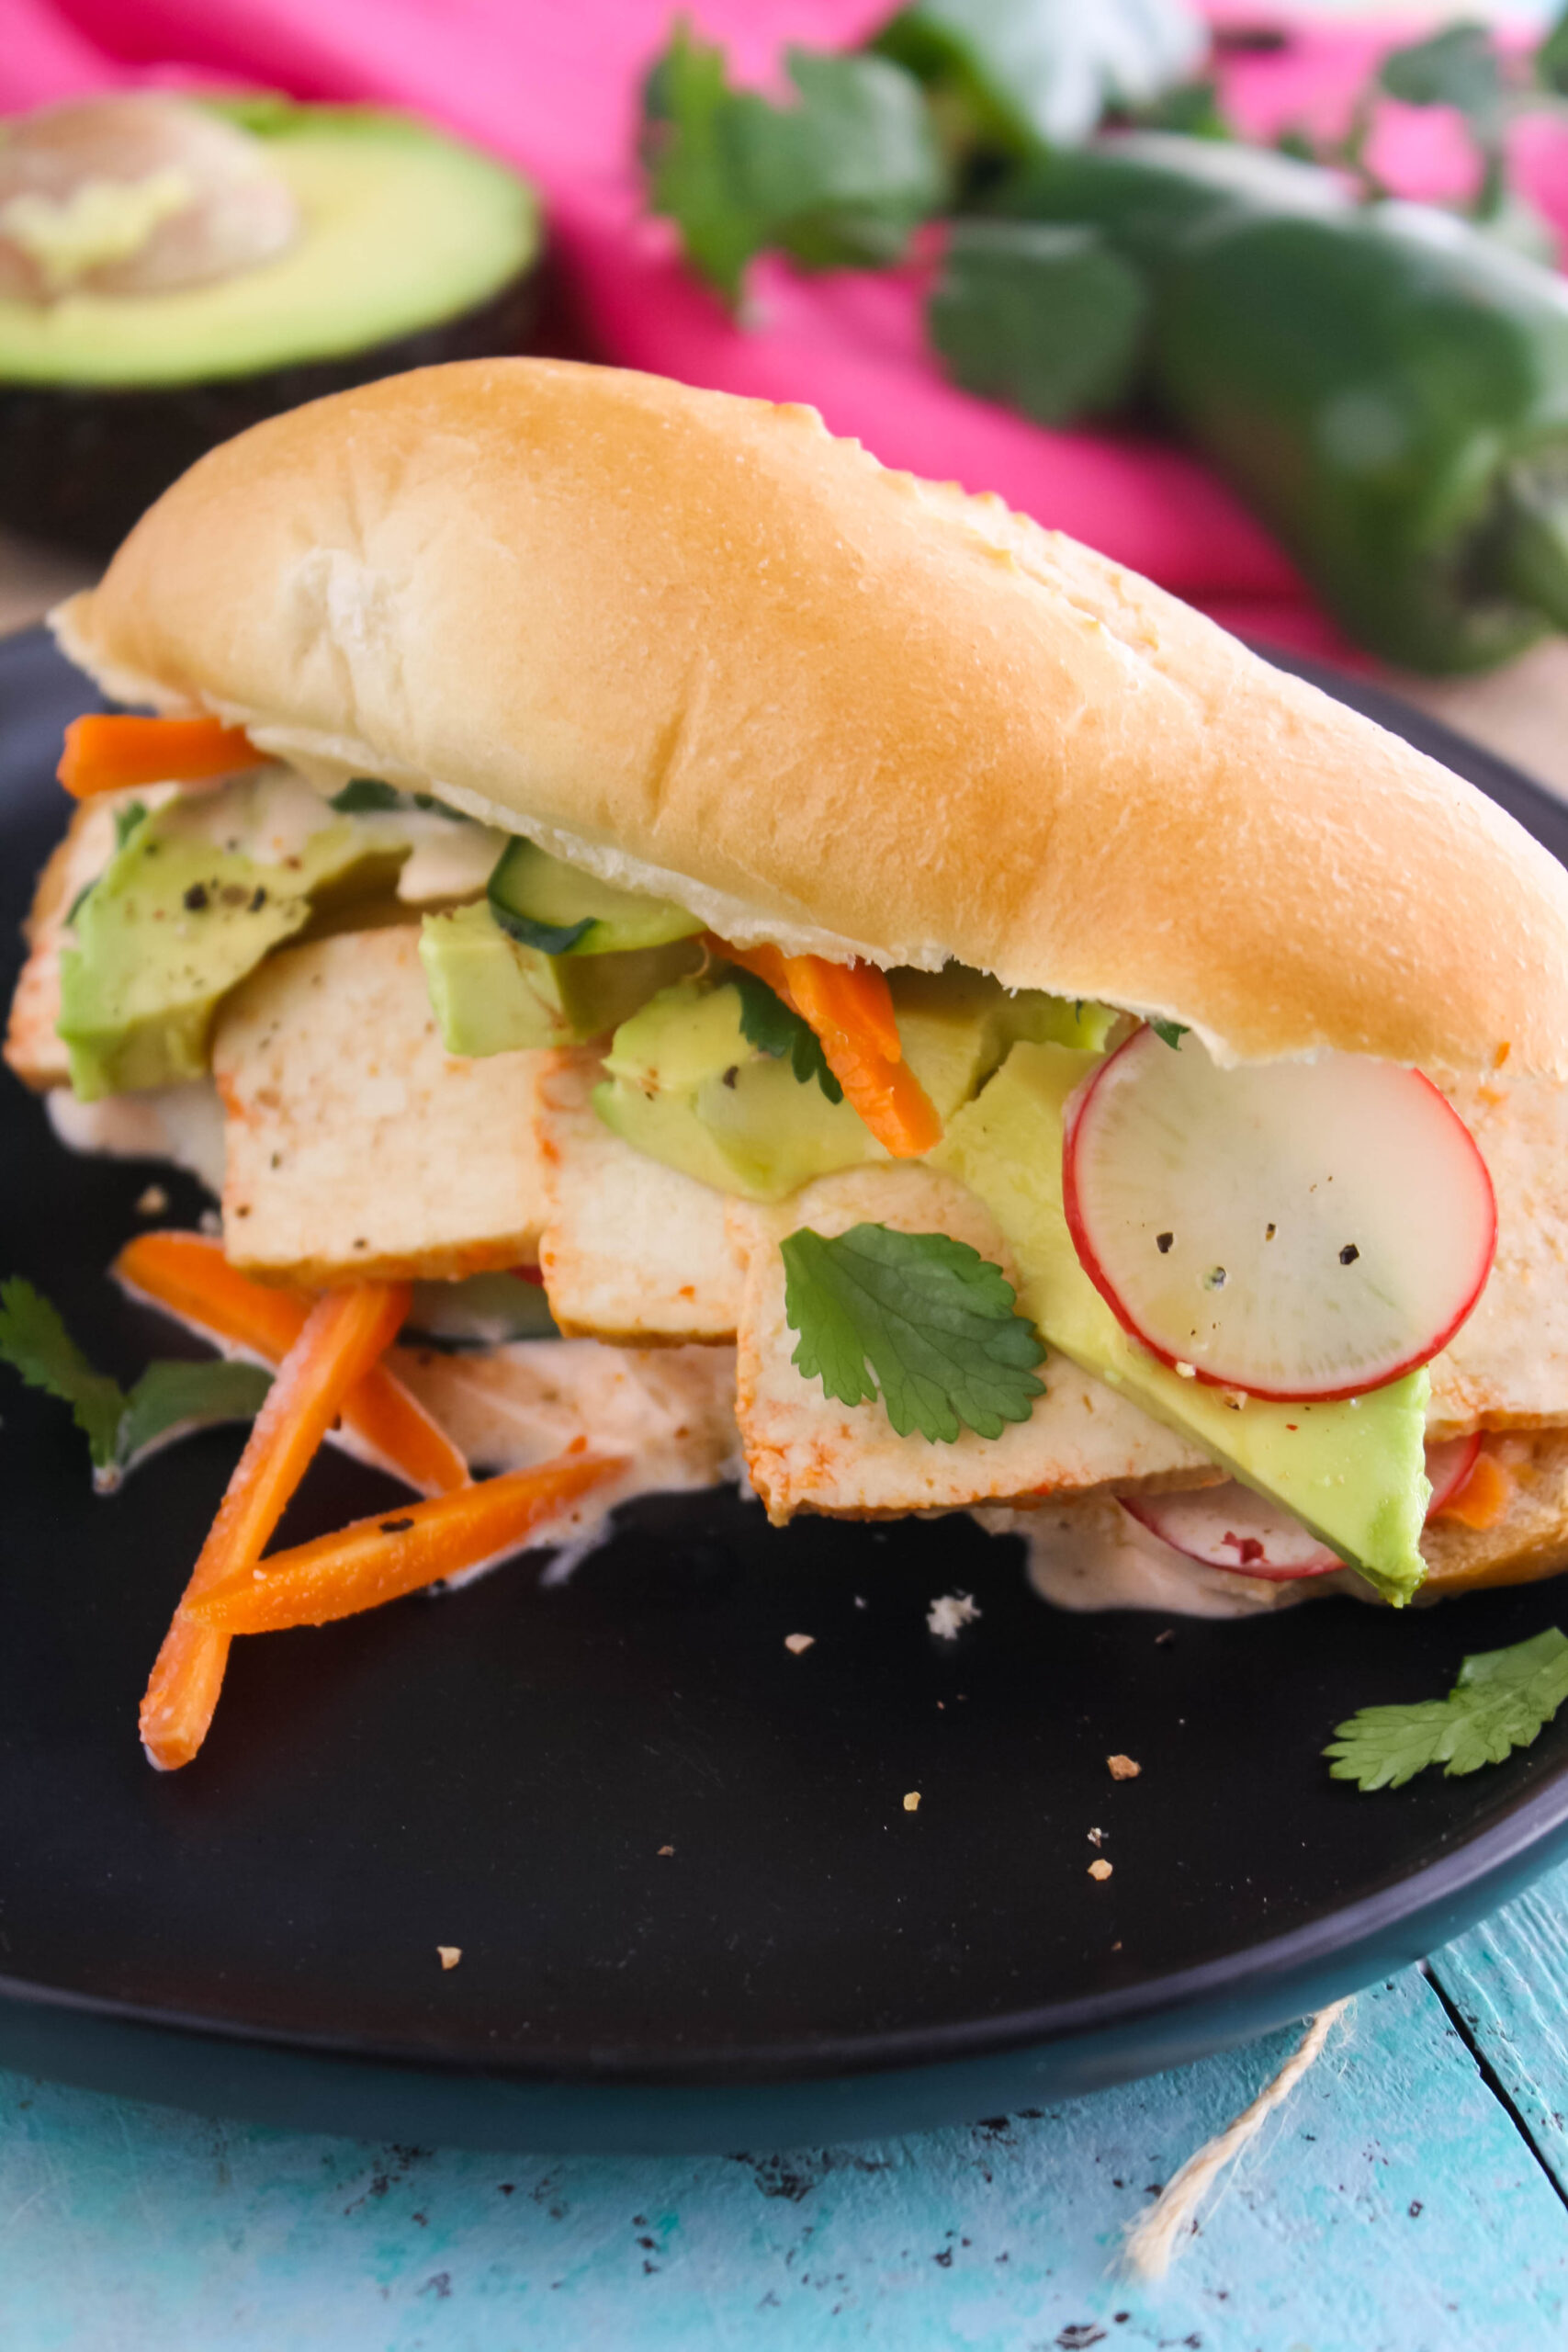 Spicy Tofu Banh Mi Sandwiches are plated and ready to serve.